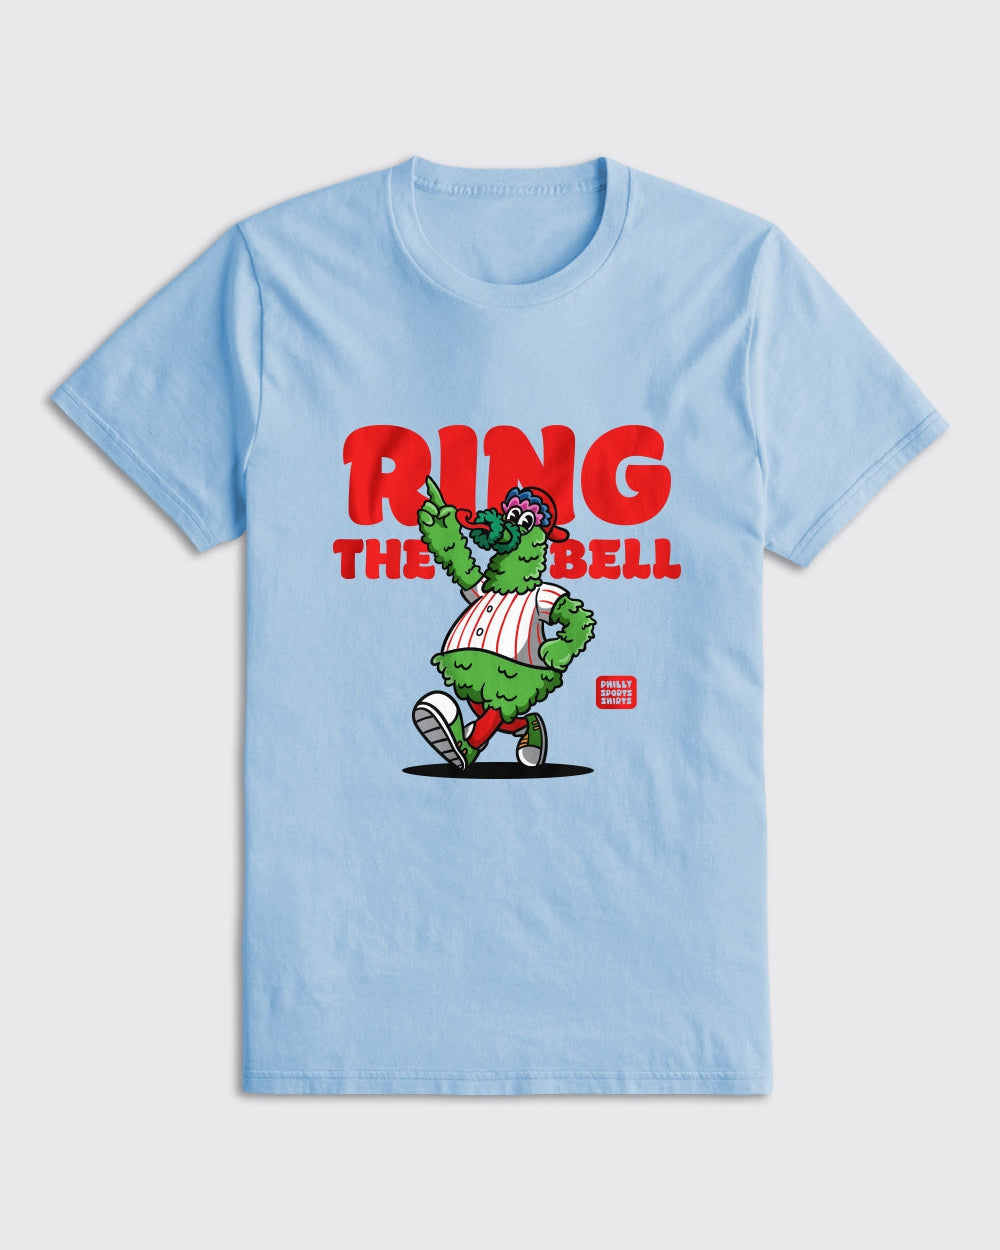 Ring The Bell Shirt - Phillies, T-Shirts - Philly Sports Shirts